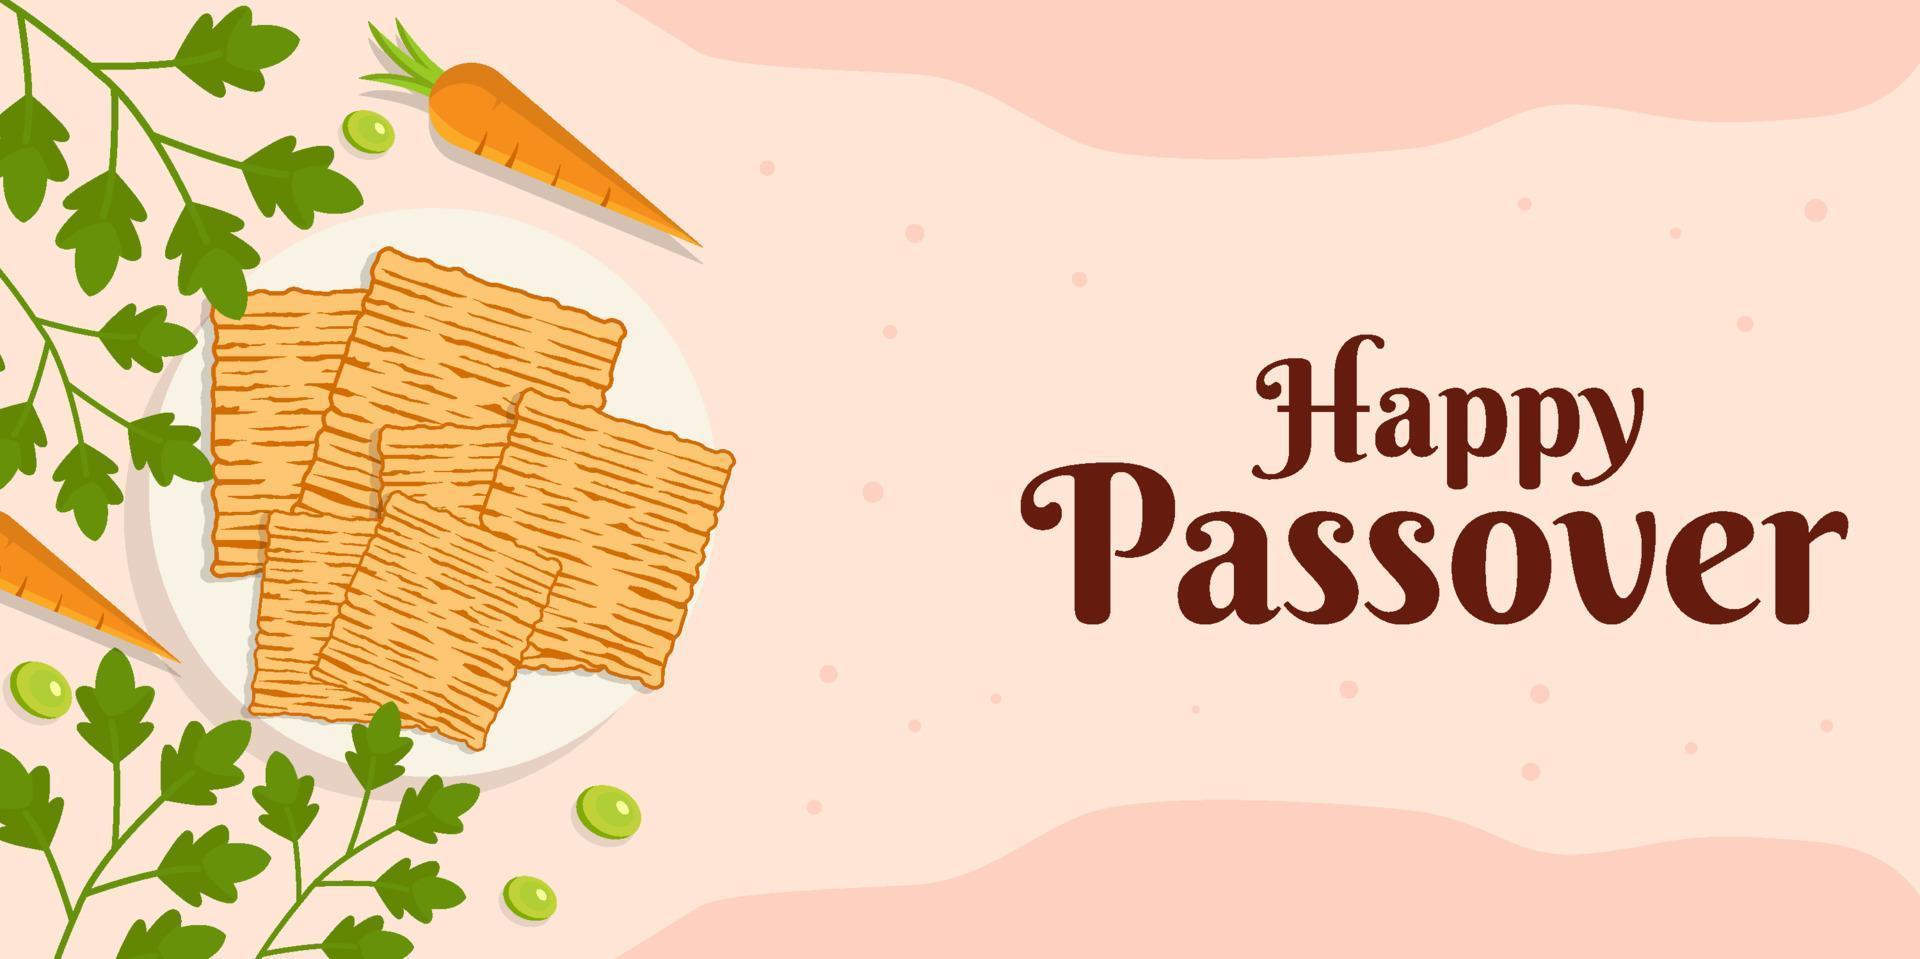 happy passover banner illustration with bread, carrot, and vegetables vector